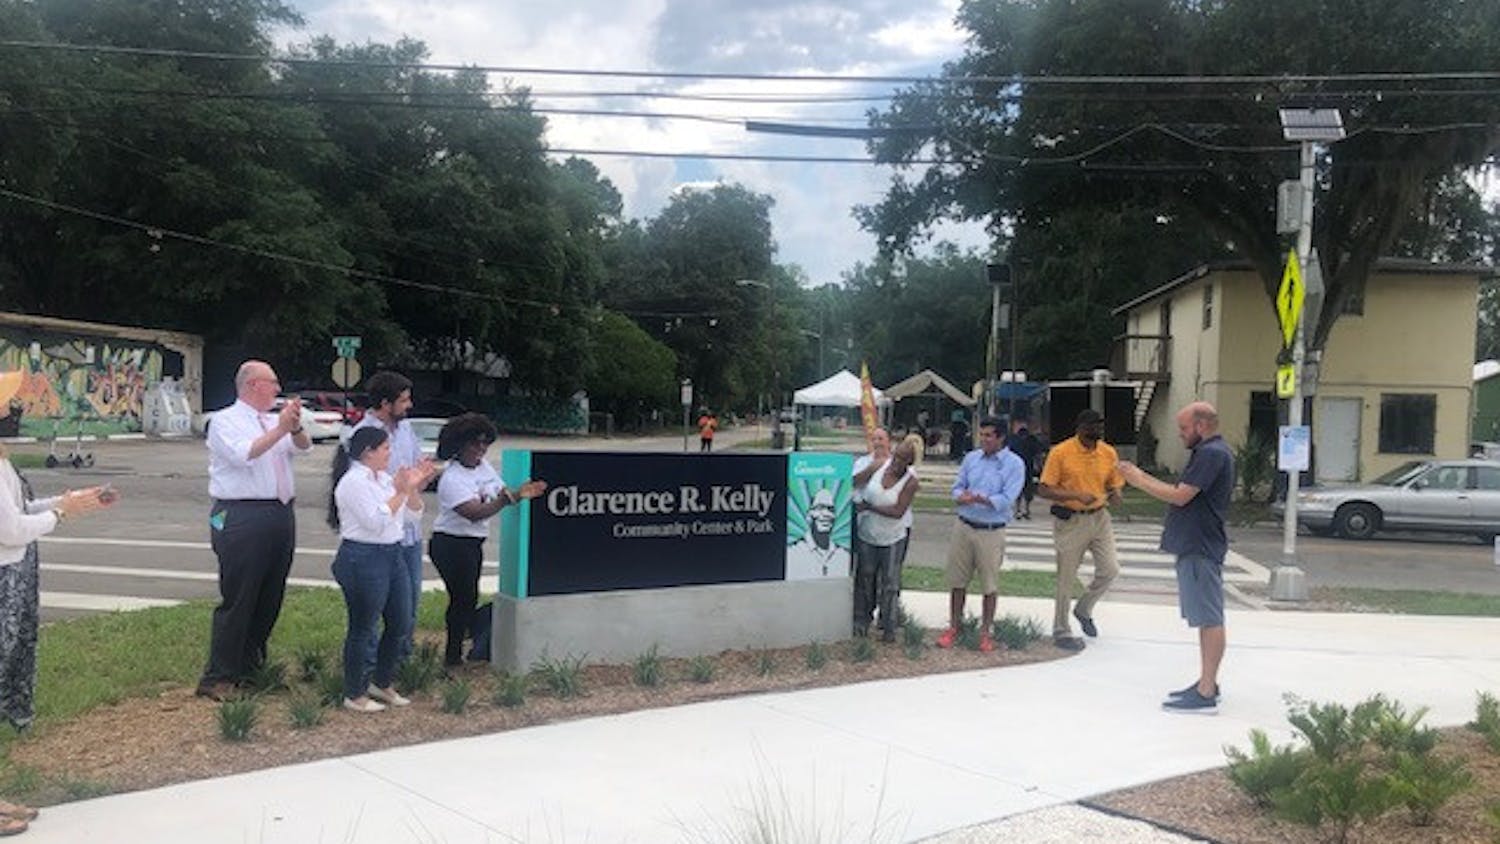 The Clarence R. Kelly Community Center fulfills the dream of its namesake to provide a space for Duval Heights children to learn.